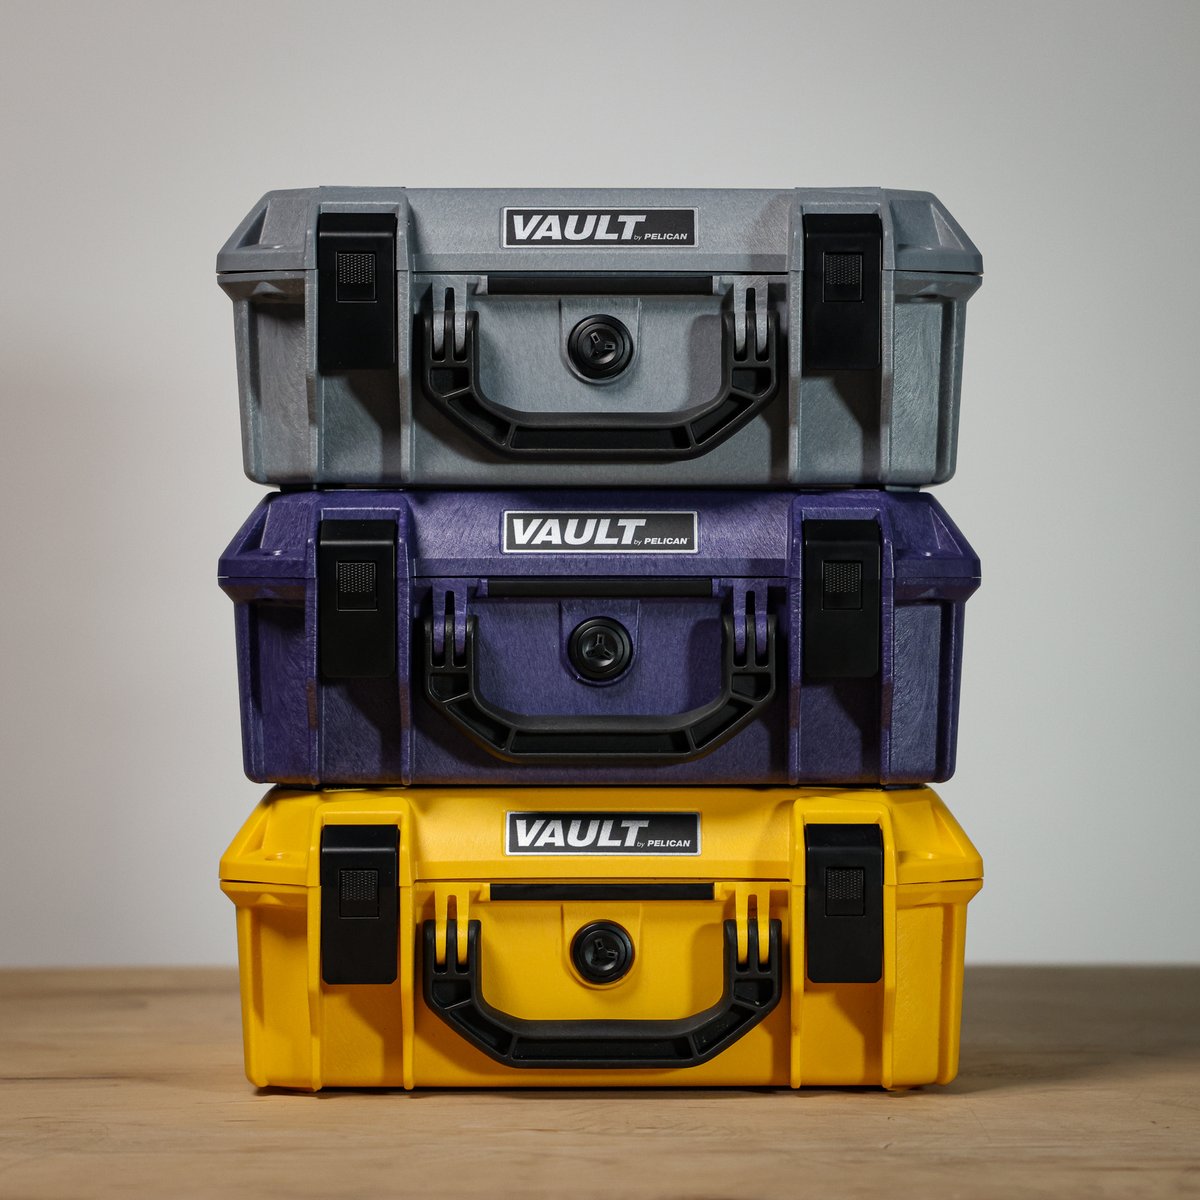 Bold colors paired with rugged protection. Available in the Vault V100C / V200C. #pelicanproducts #builttoprotect